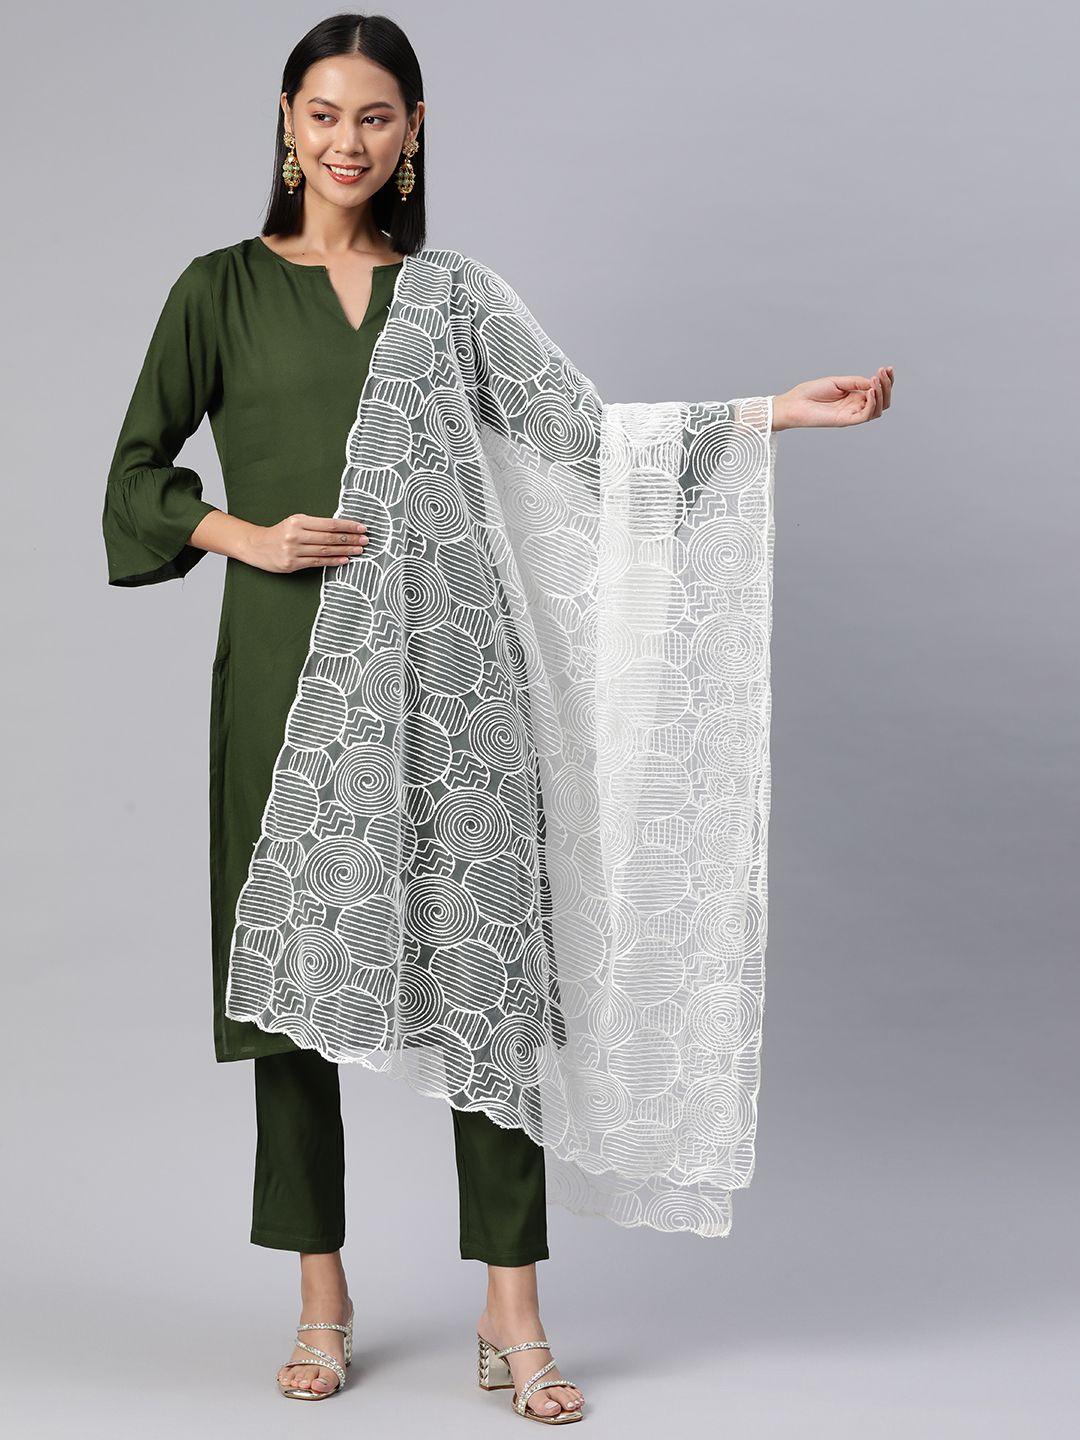 rang-gali-embroidered-dupatta-with-thread-work